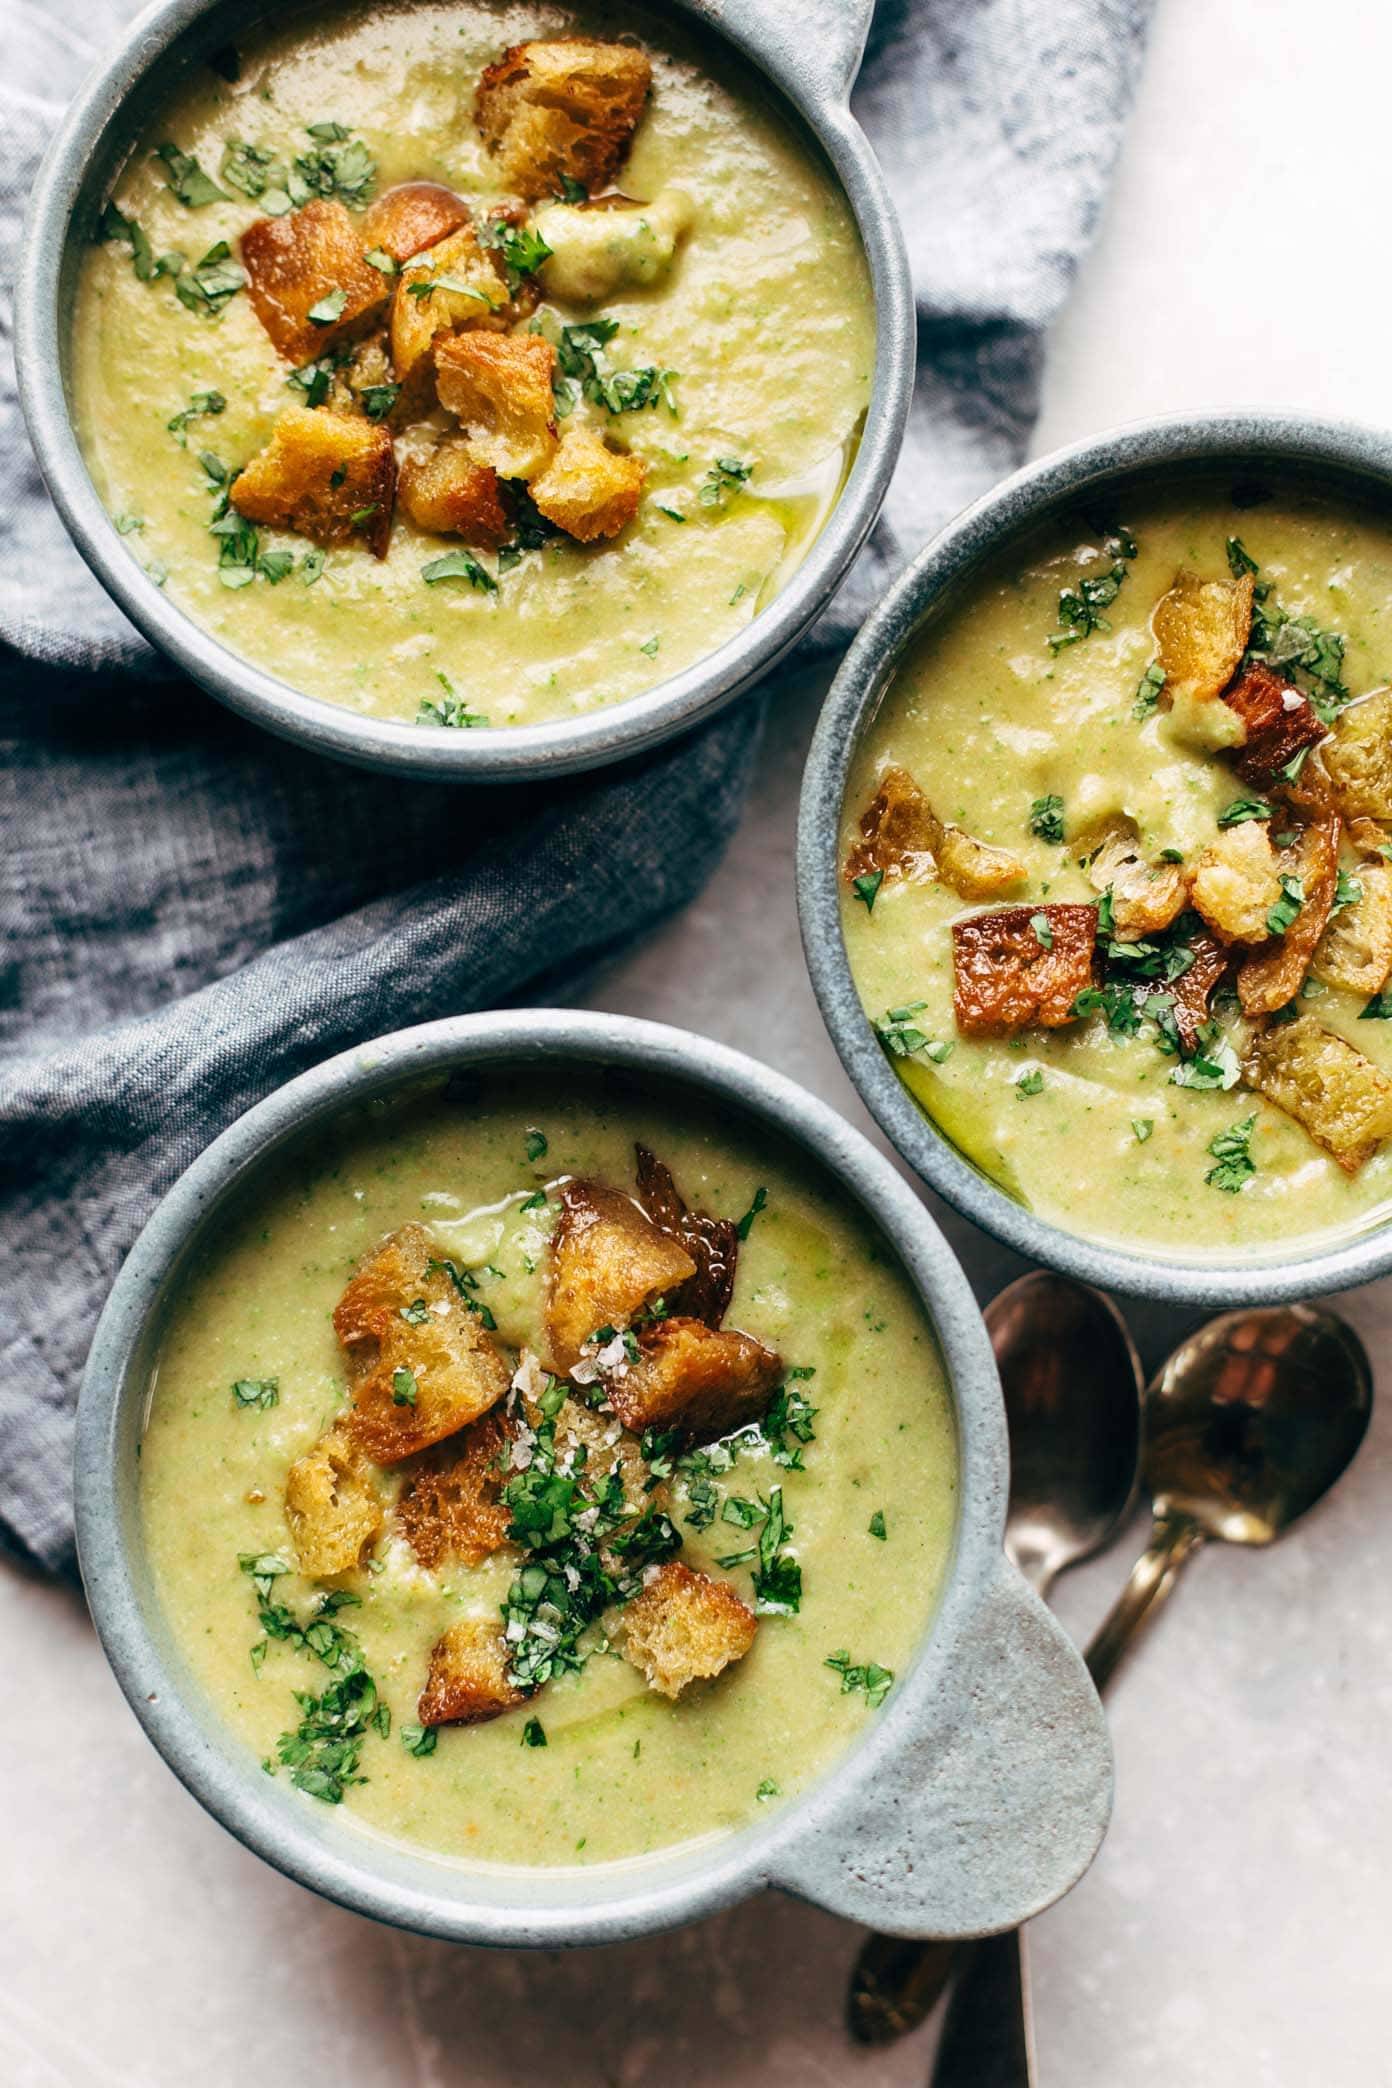 Vegan broccoli cheese soup in bowls with croutons.